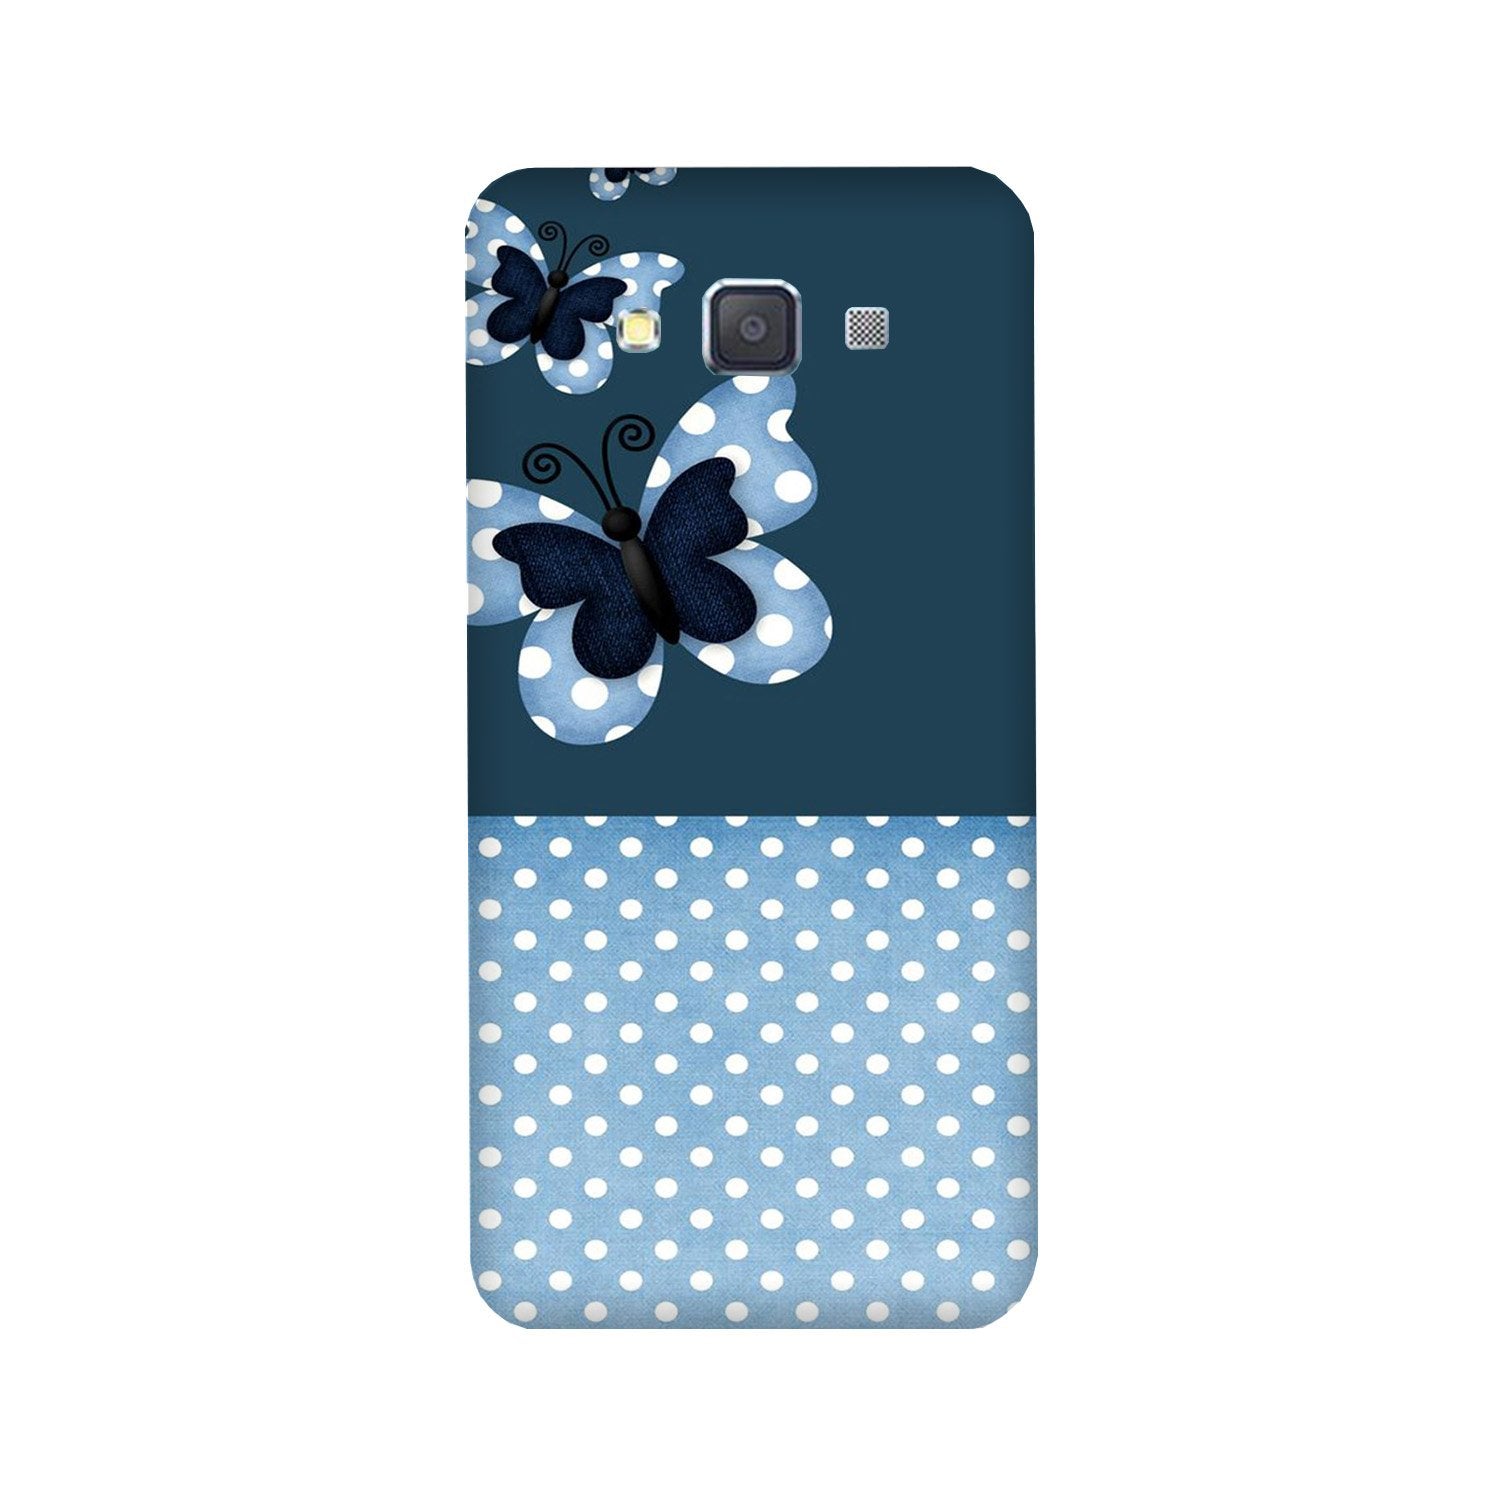 White dots Butterfly Case for Galaxy J7 (2016)